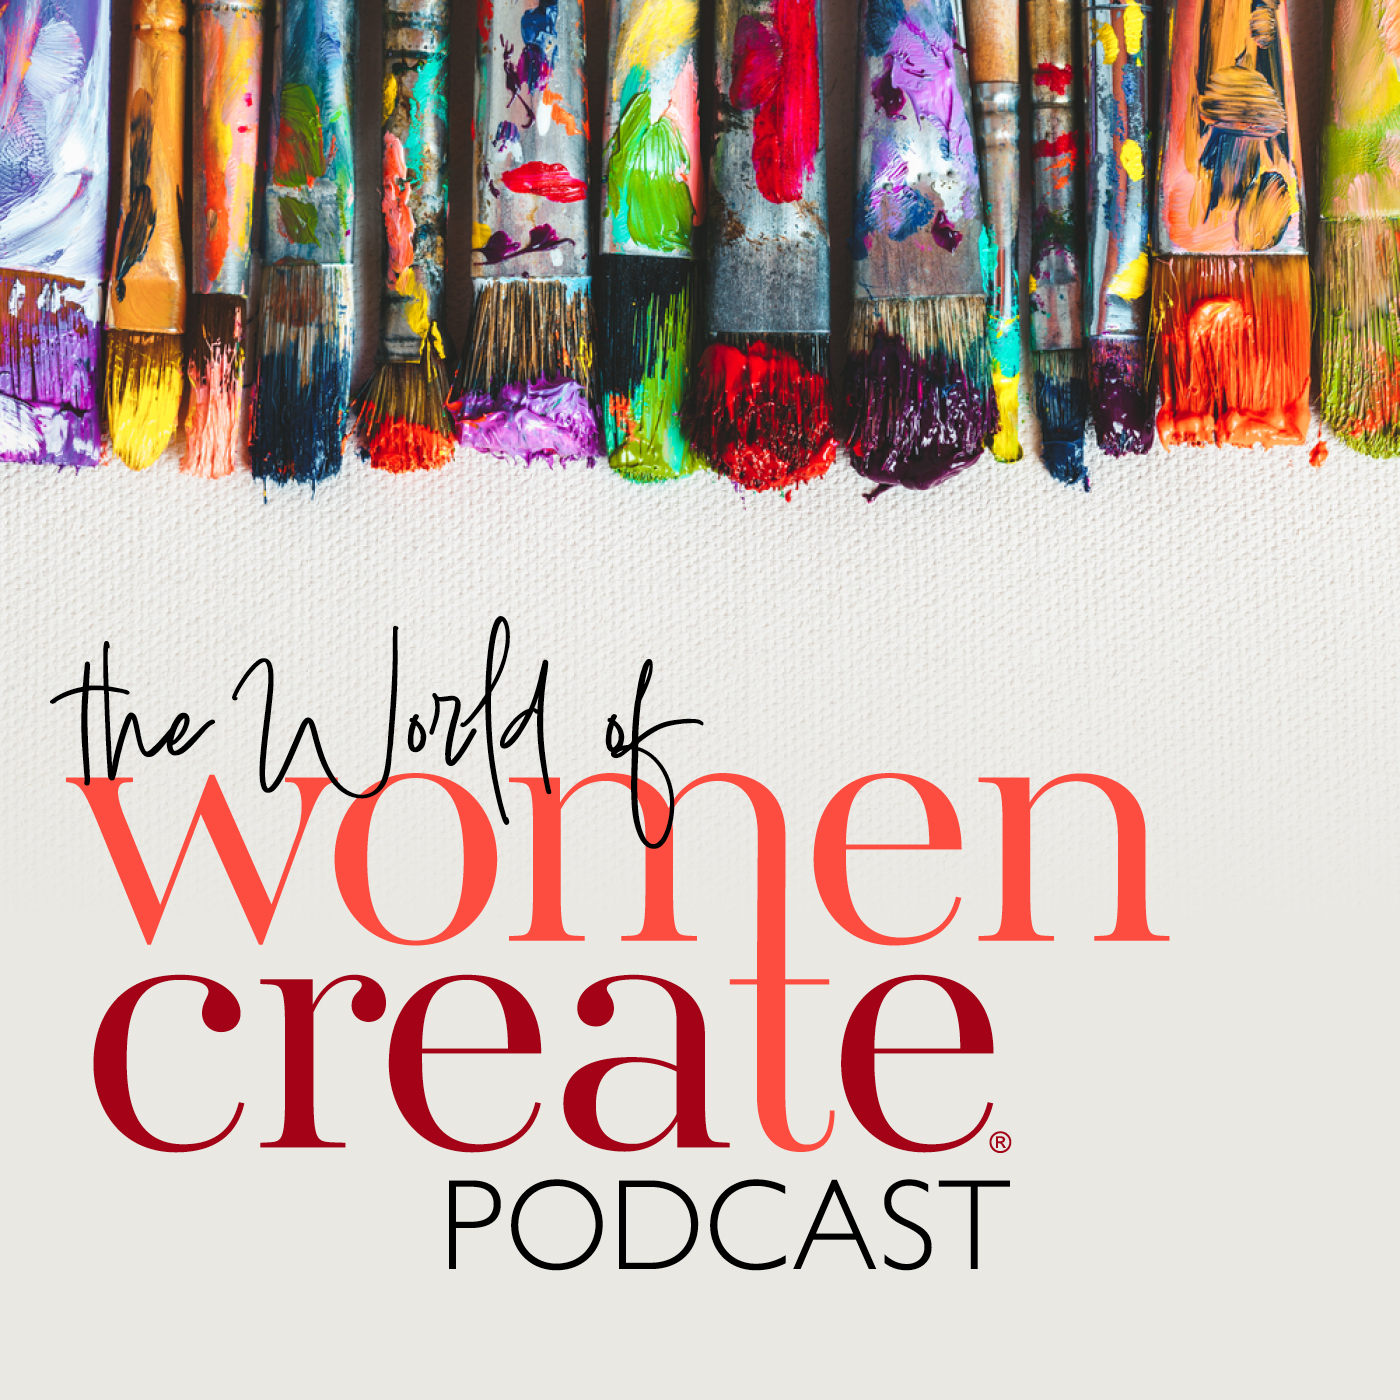 Ep. 12: From Corporate Fashion to Creative Entrepreneur with Christine Lindebak